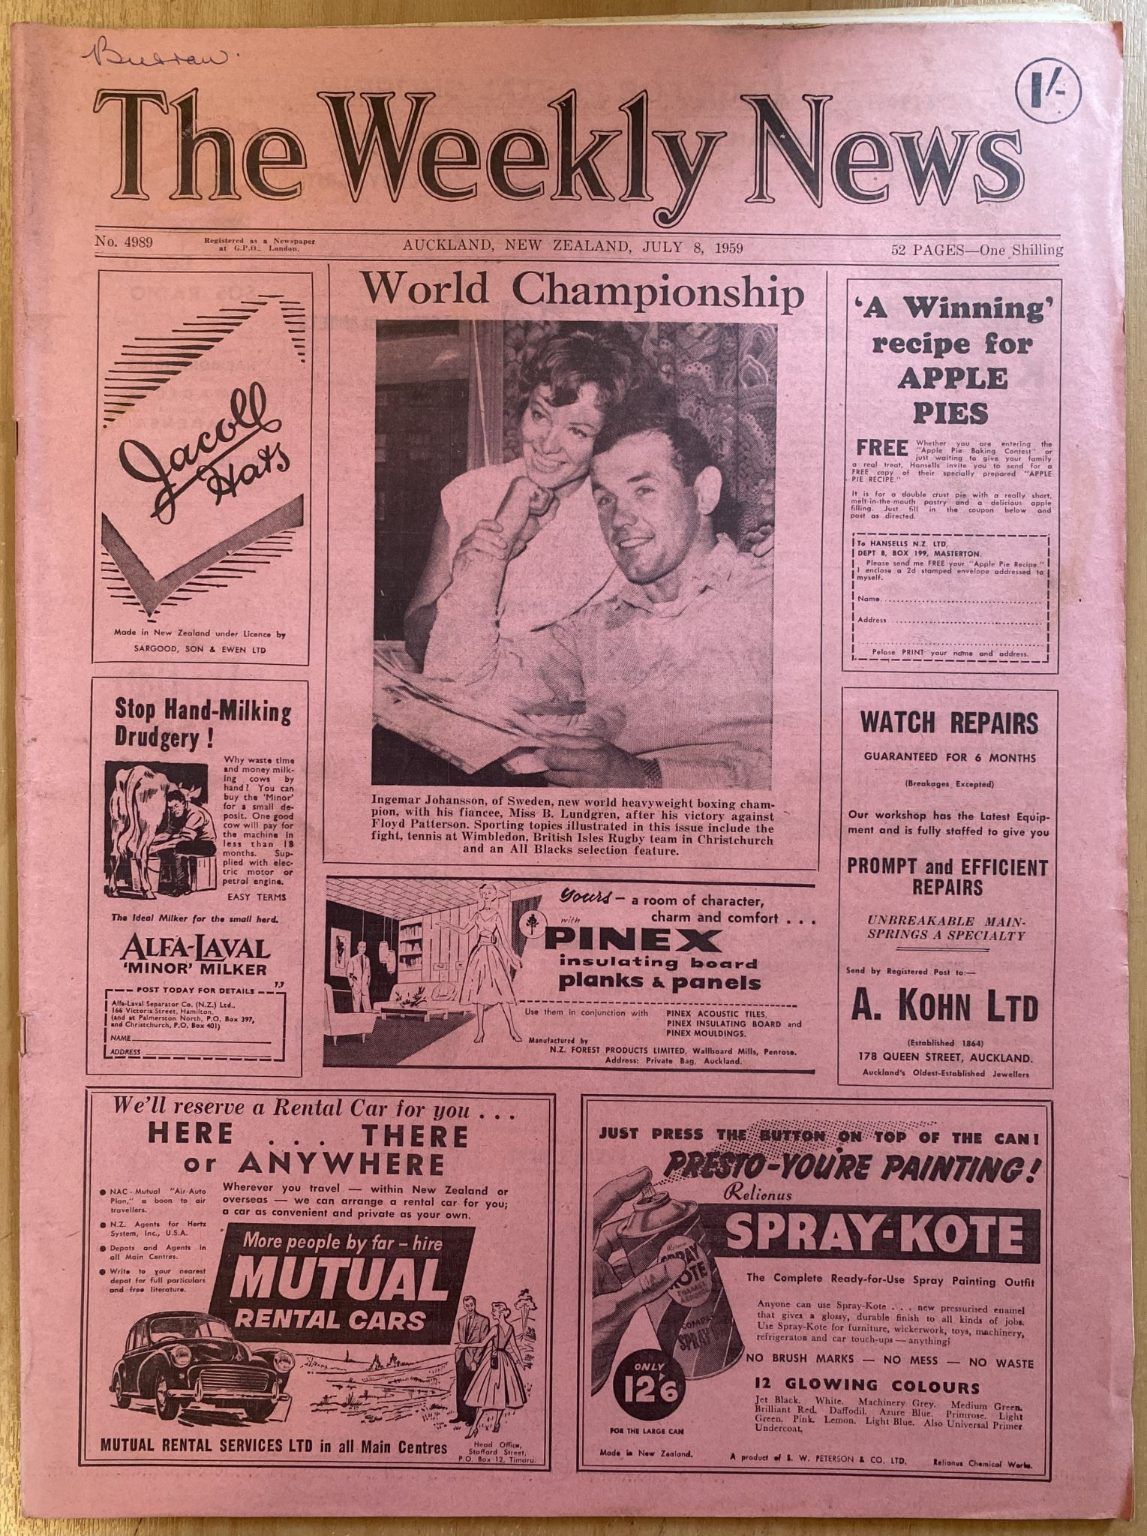 OLD NEWSPAPER: The Weekly News - No. 4989, 8 July 1959